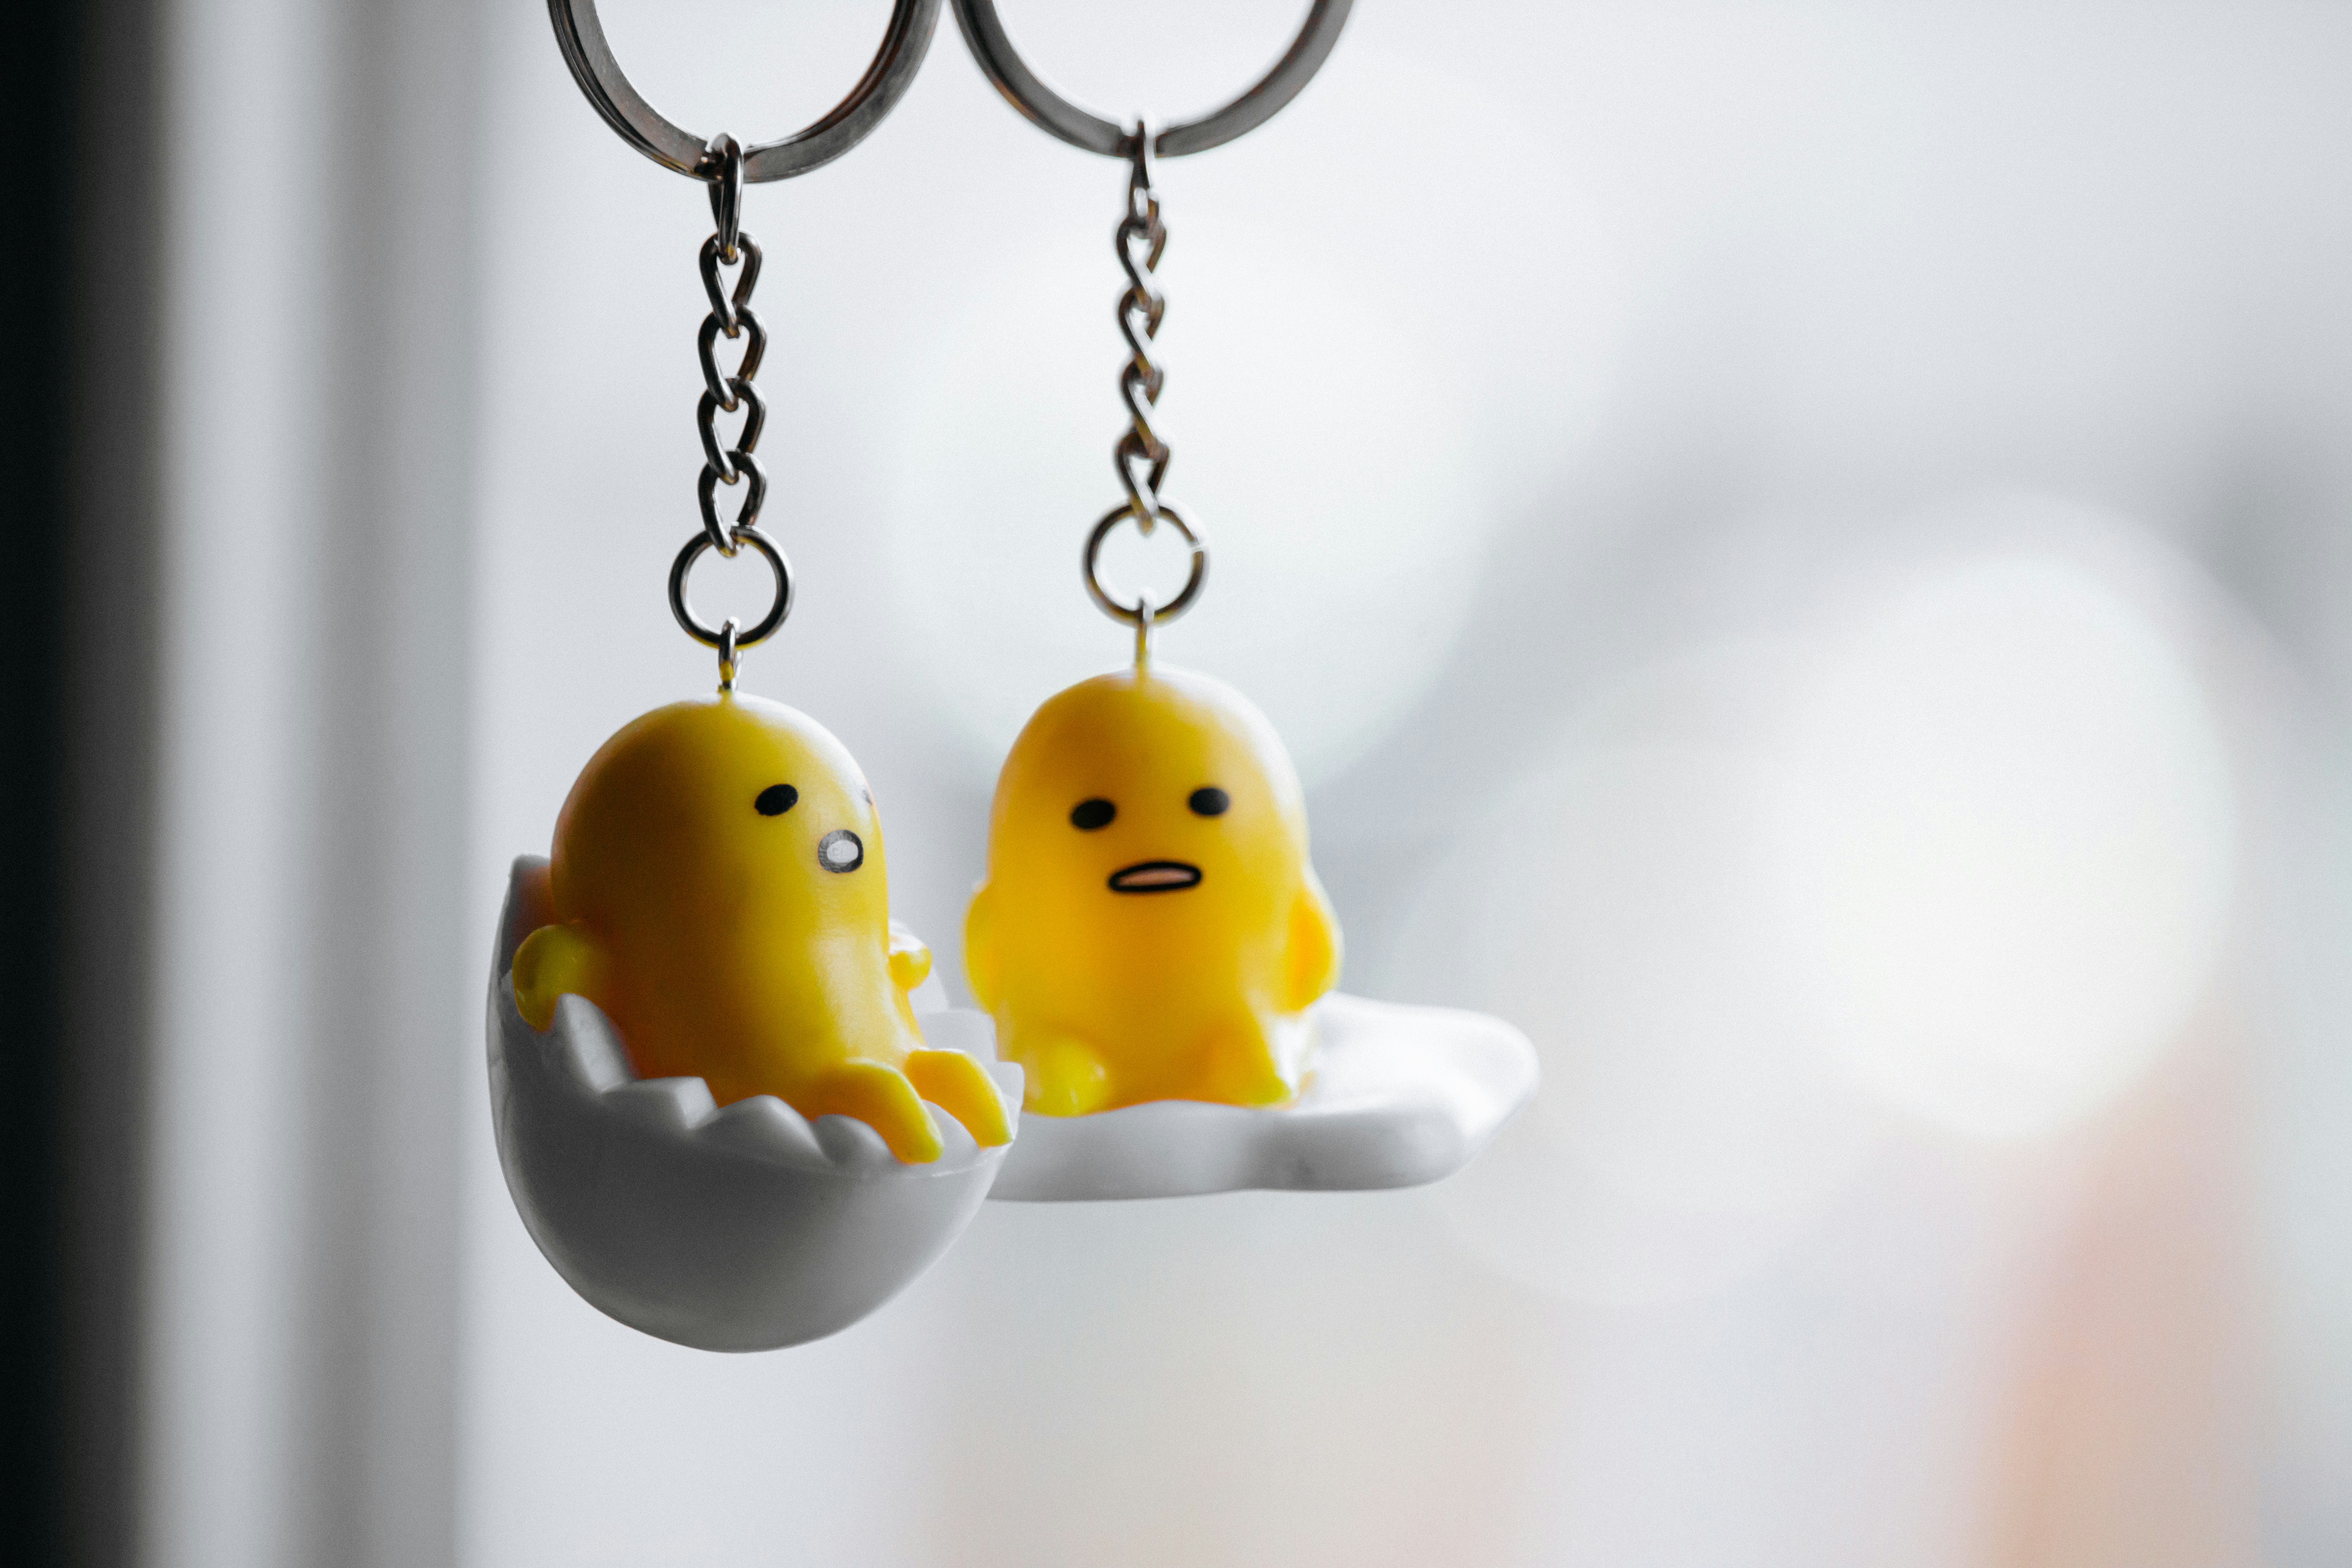 shallow focus photo of two yellow bird keychains